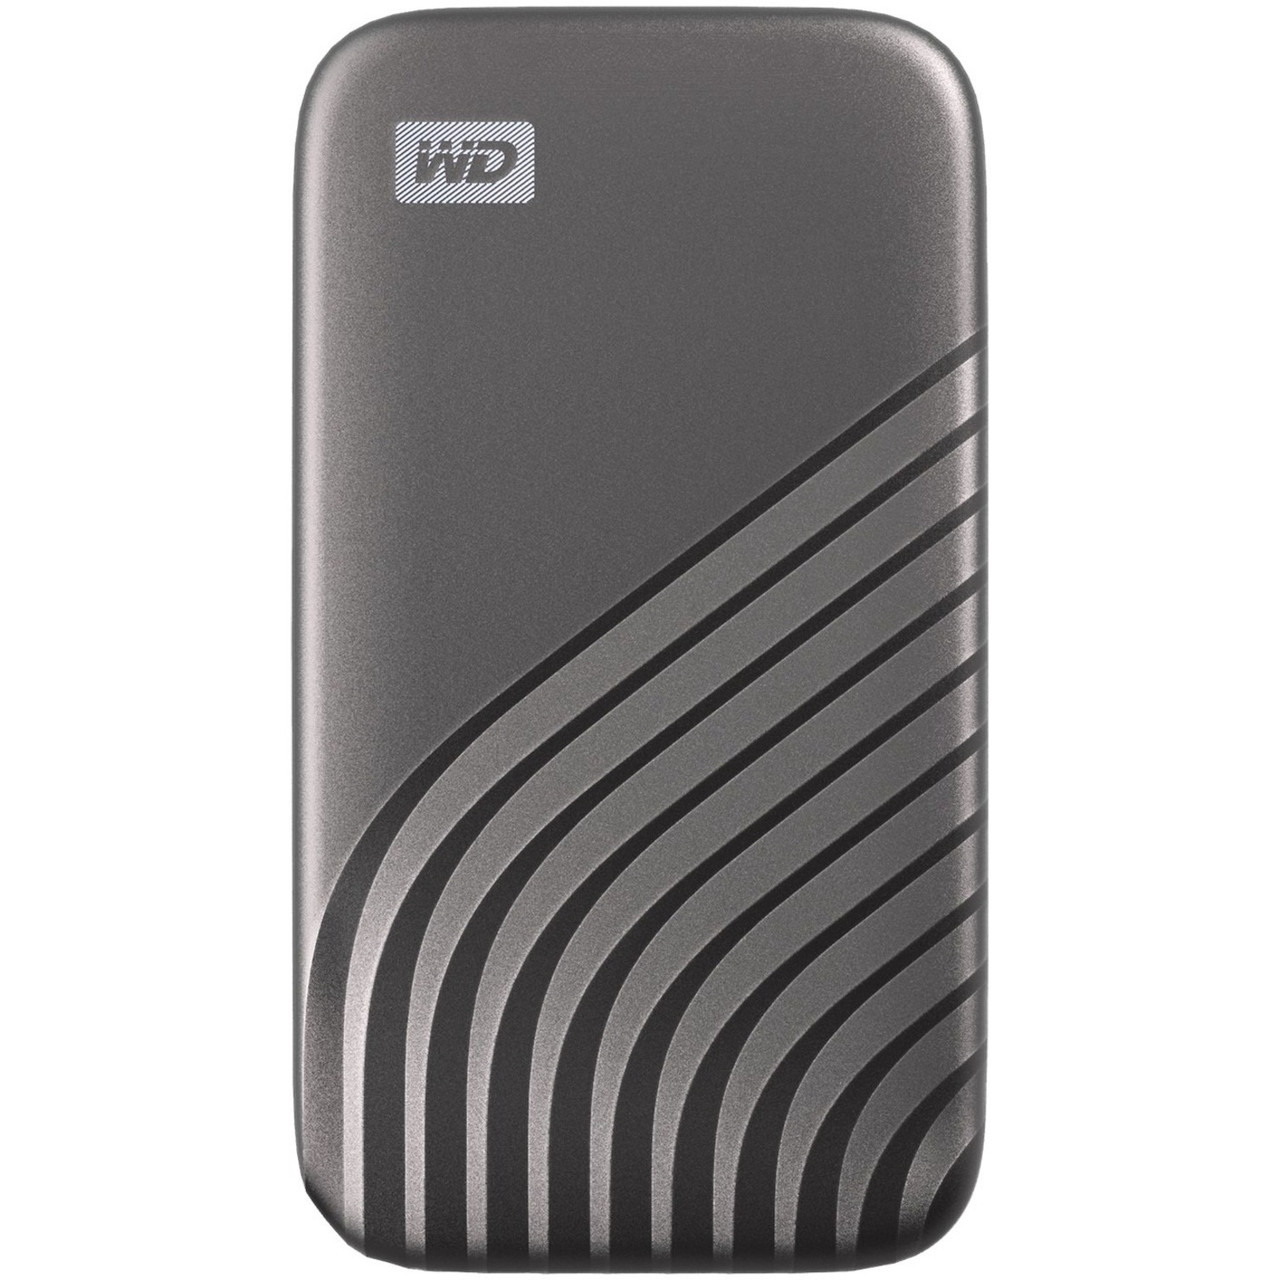 Sandisk WD My Passport WDBAGF0020BGY-WESN 2 TB Portable Solid State Drive